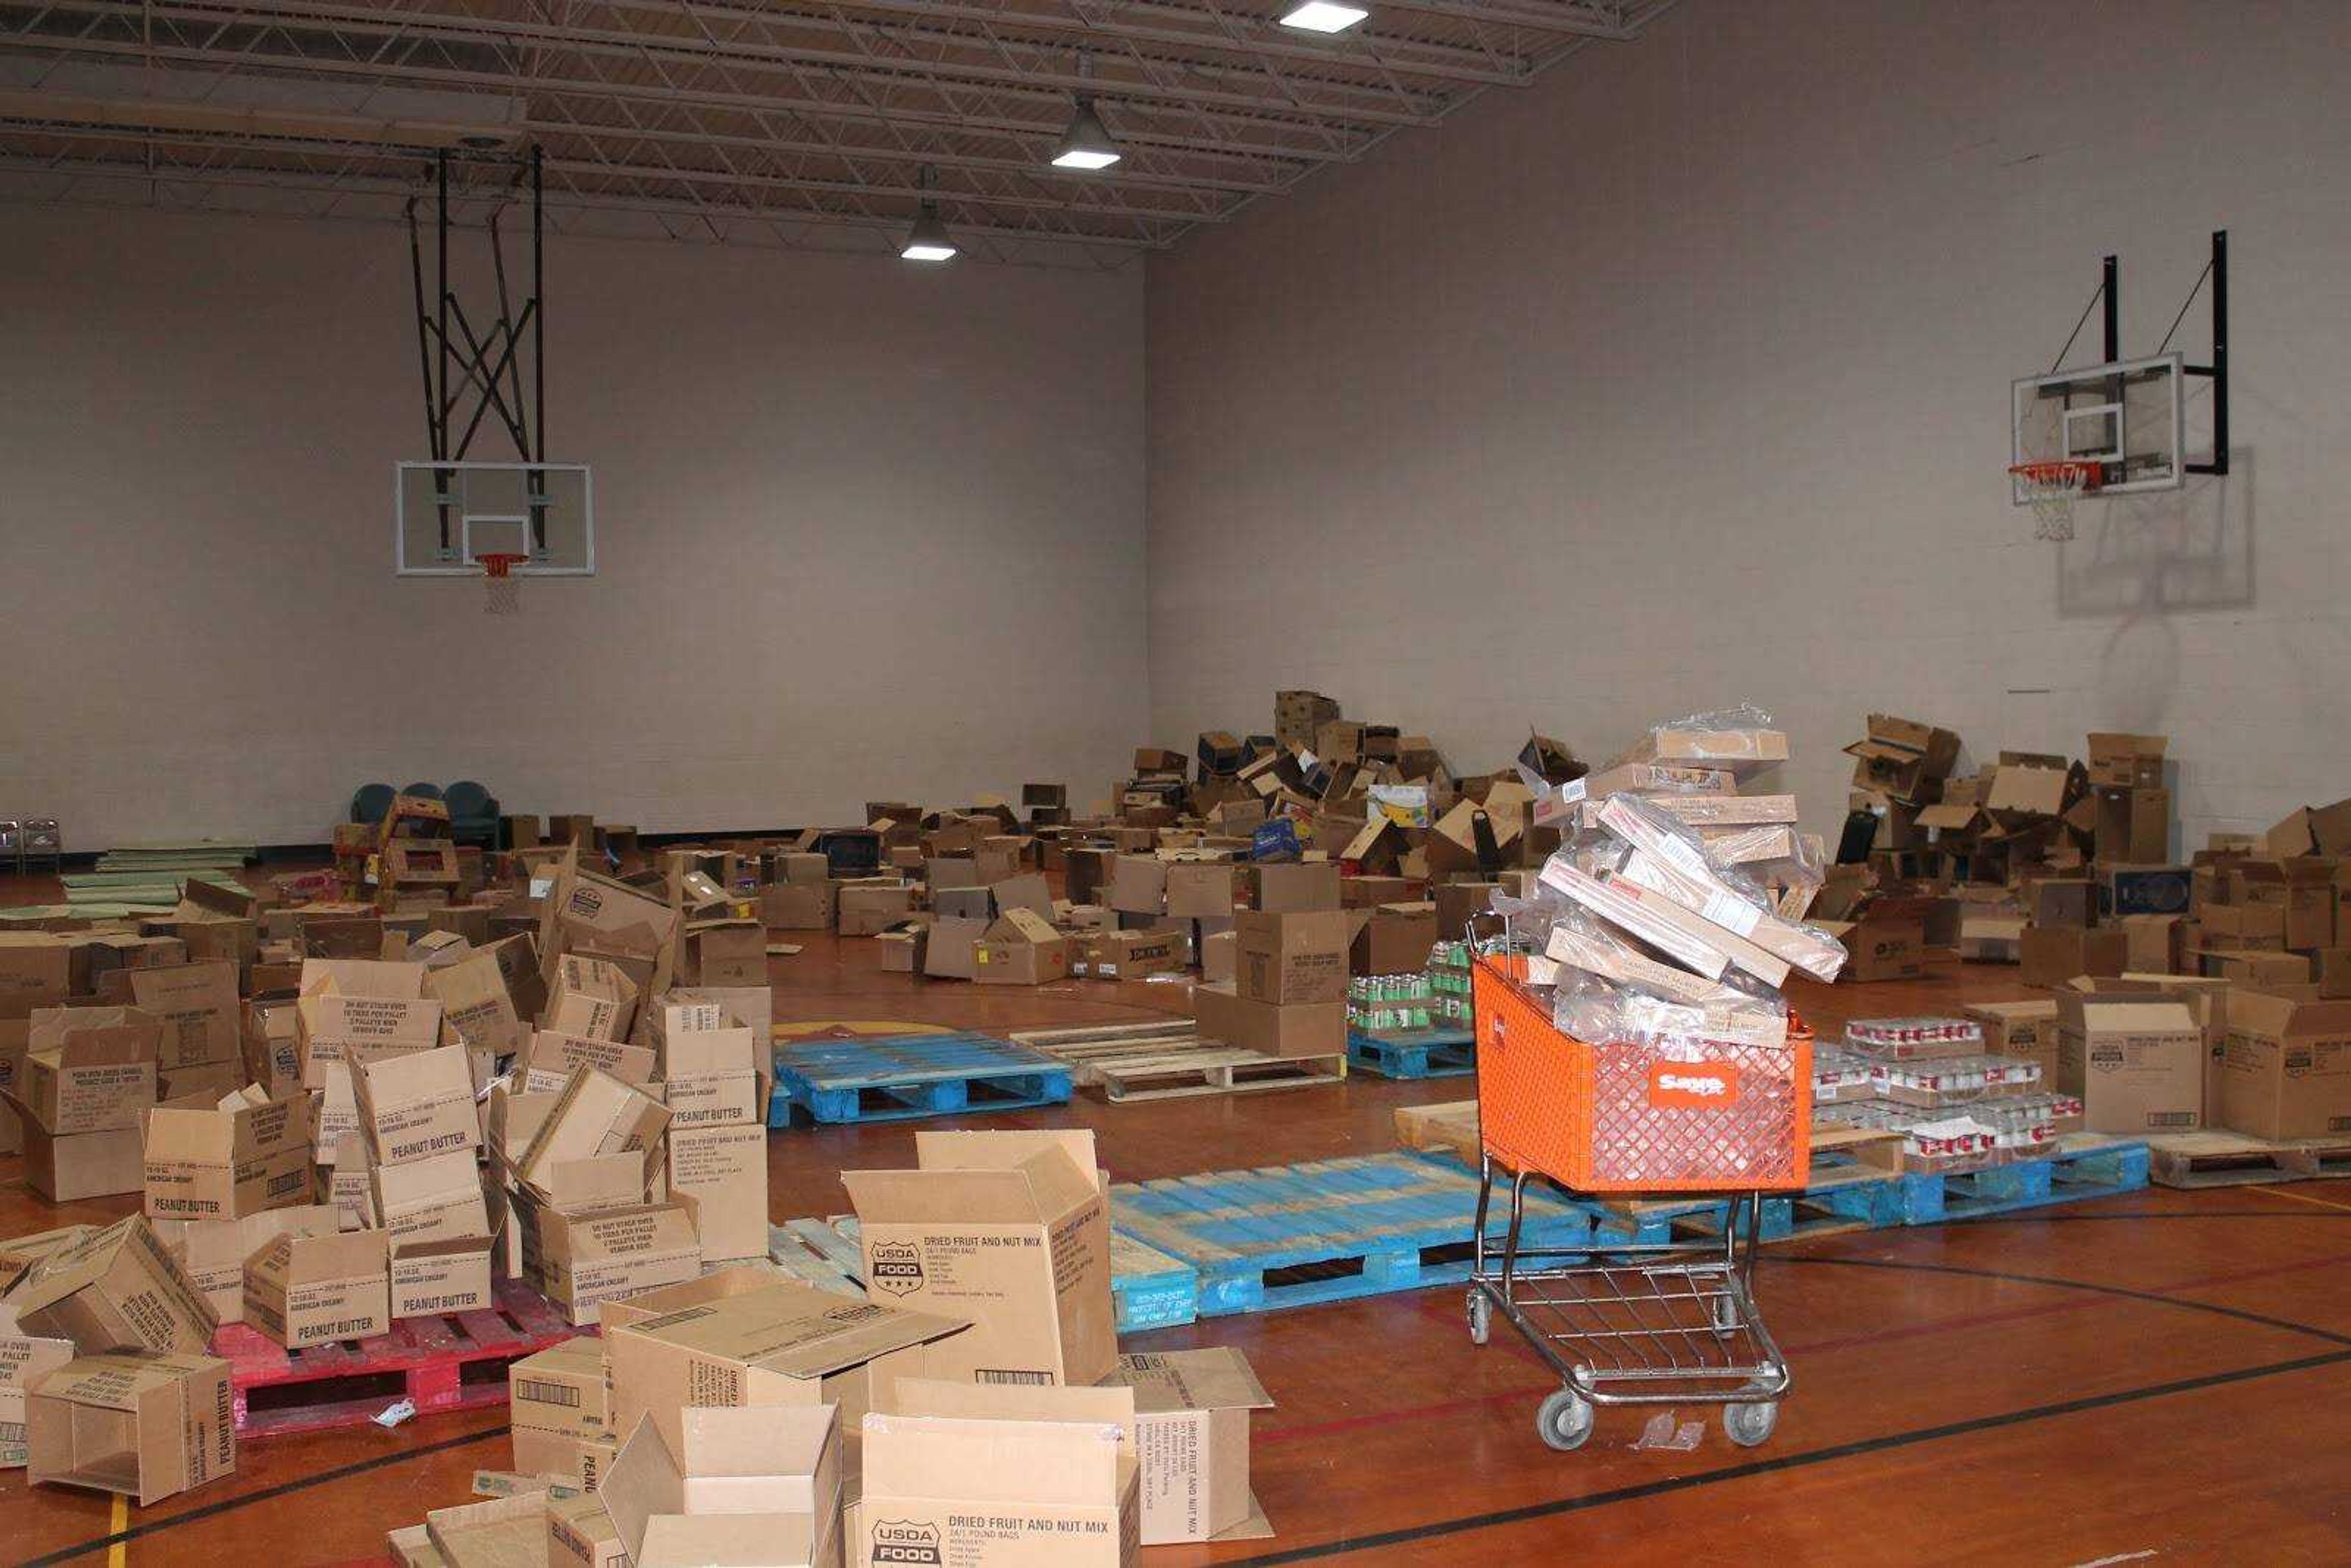 The gym at Red Star Baptist Church is filled with empty boxes after the food pantry team packaged donations to be distributed on Saturday, April 25.